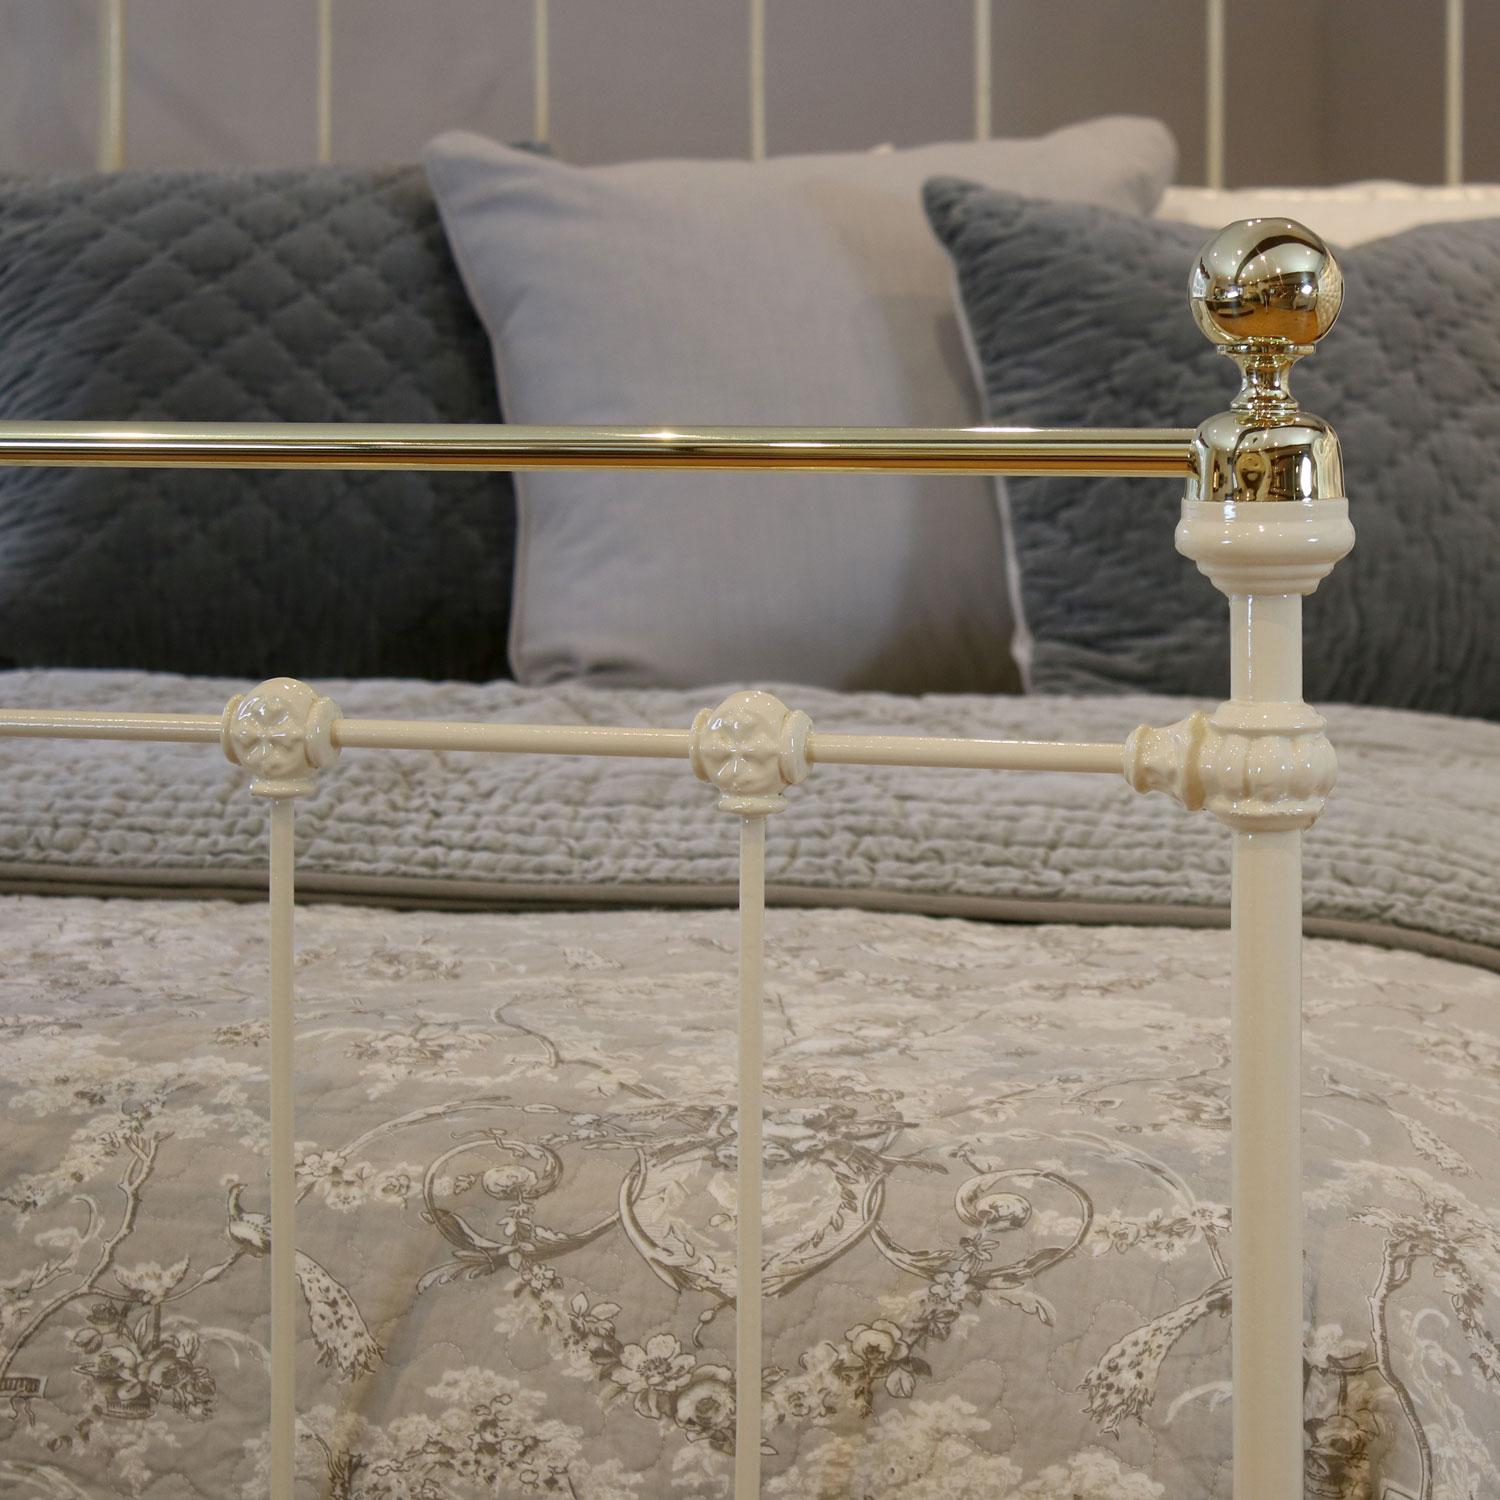 Victorian Double Antique Bed in Cream, MD98